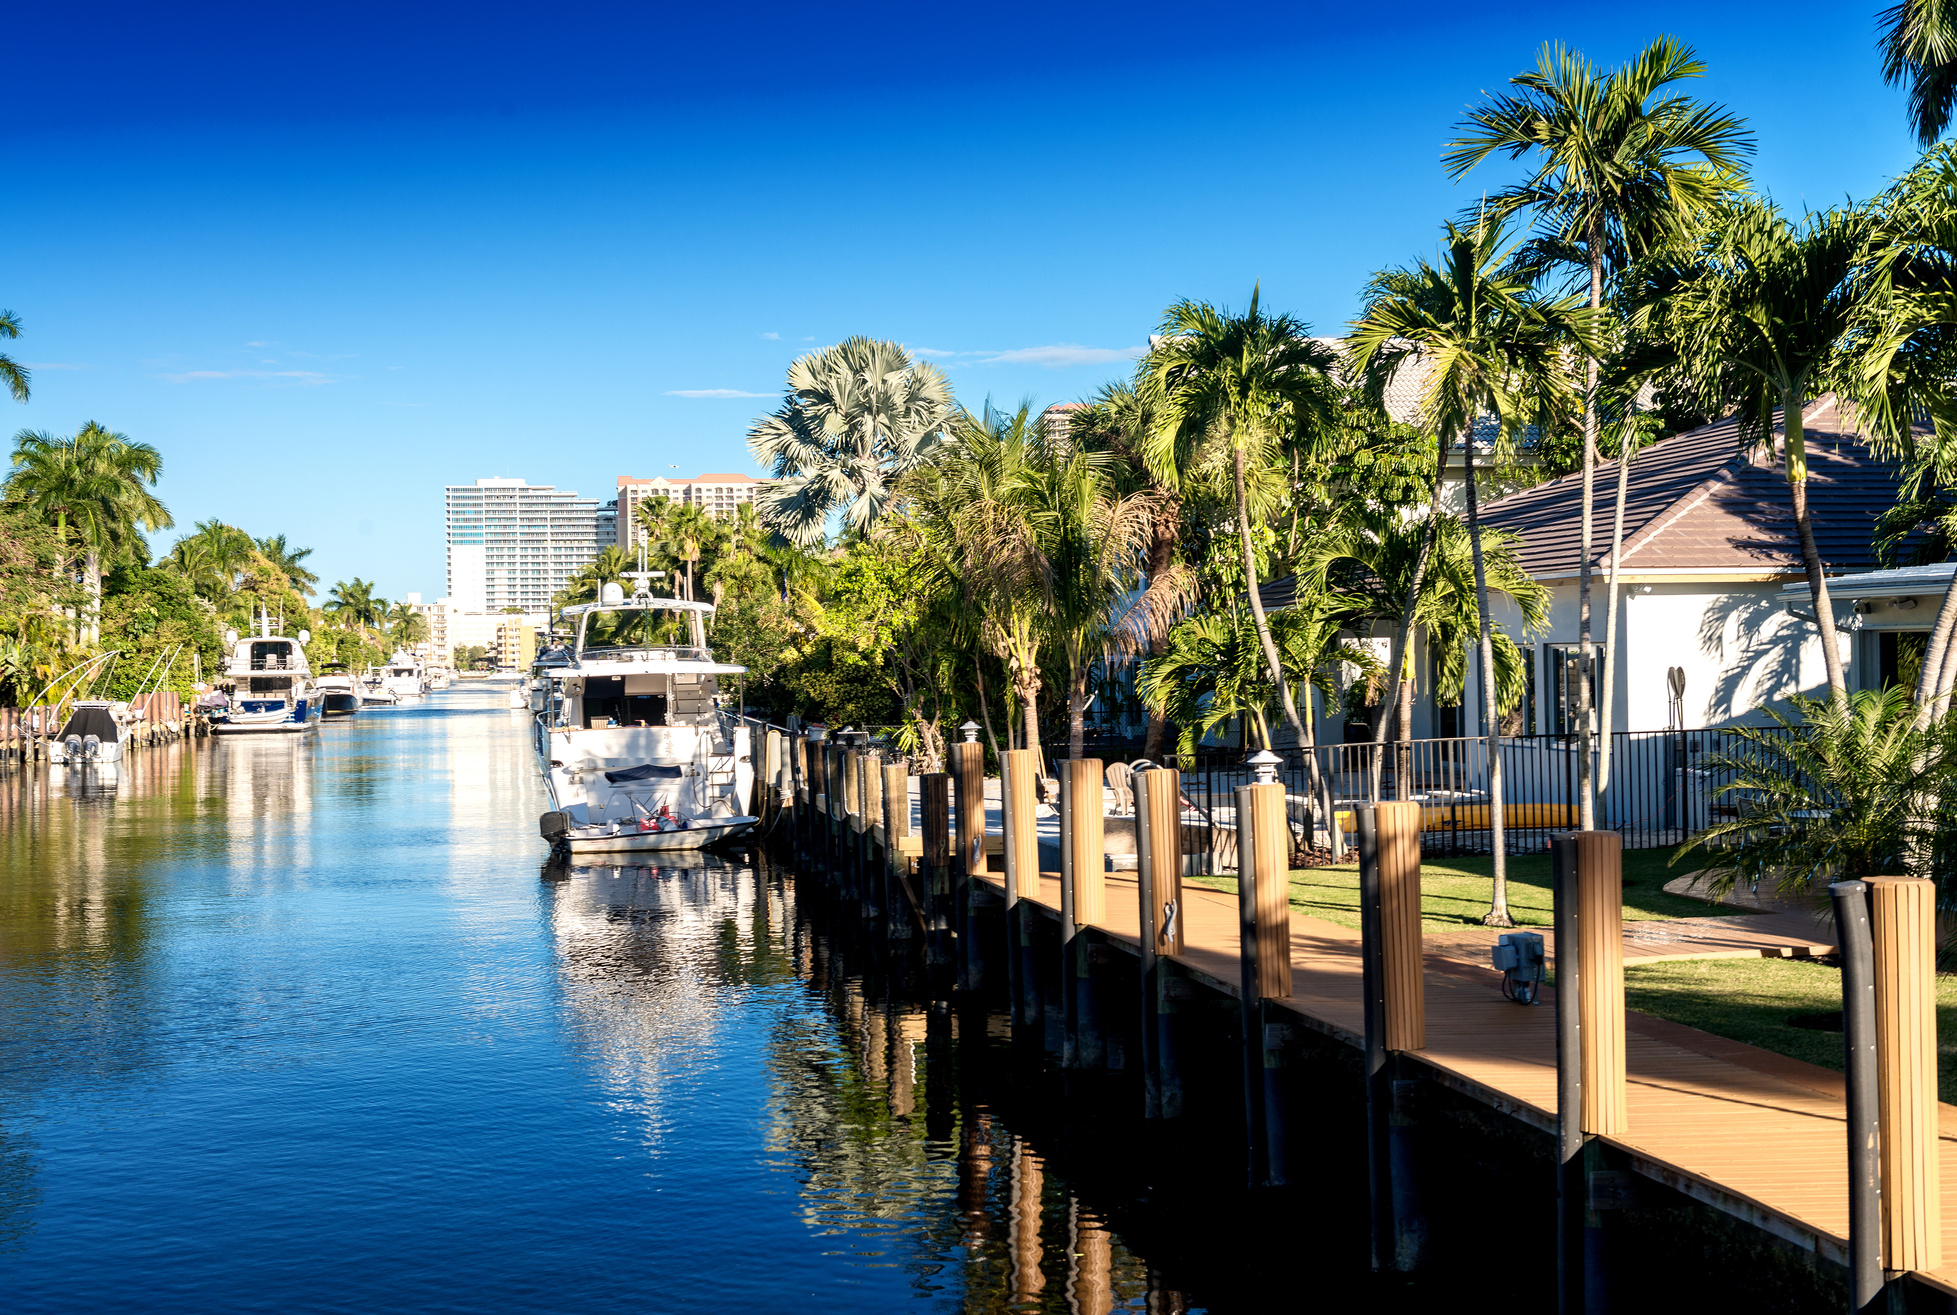 Canals of Fort Lauderdale 